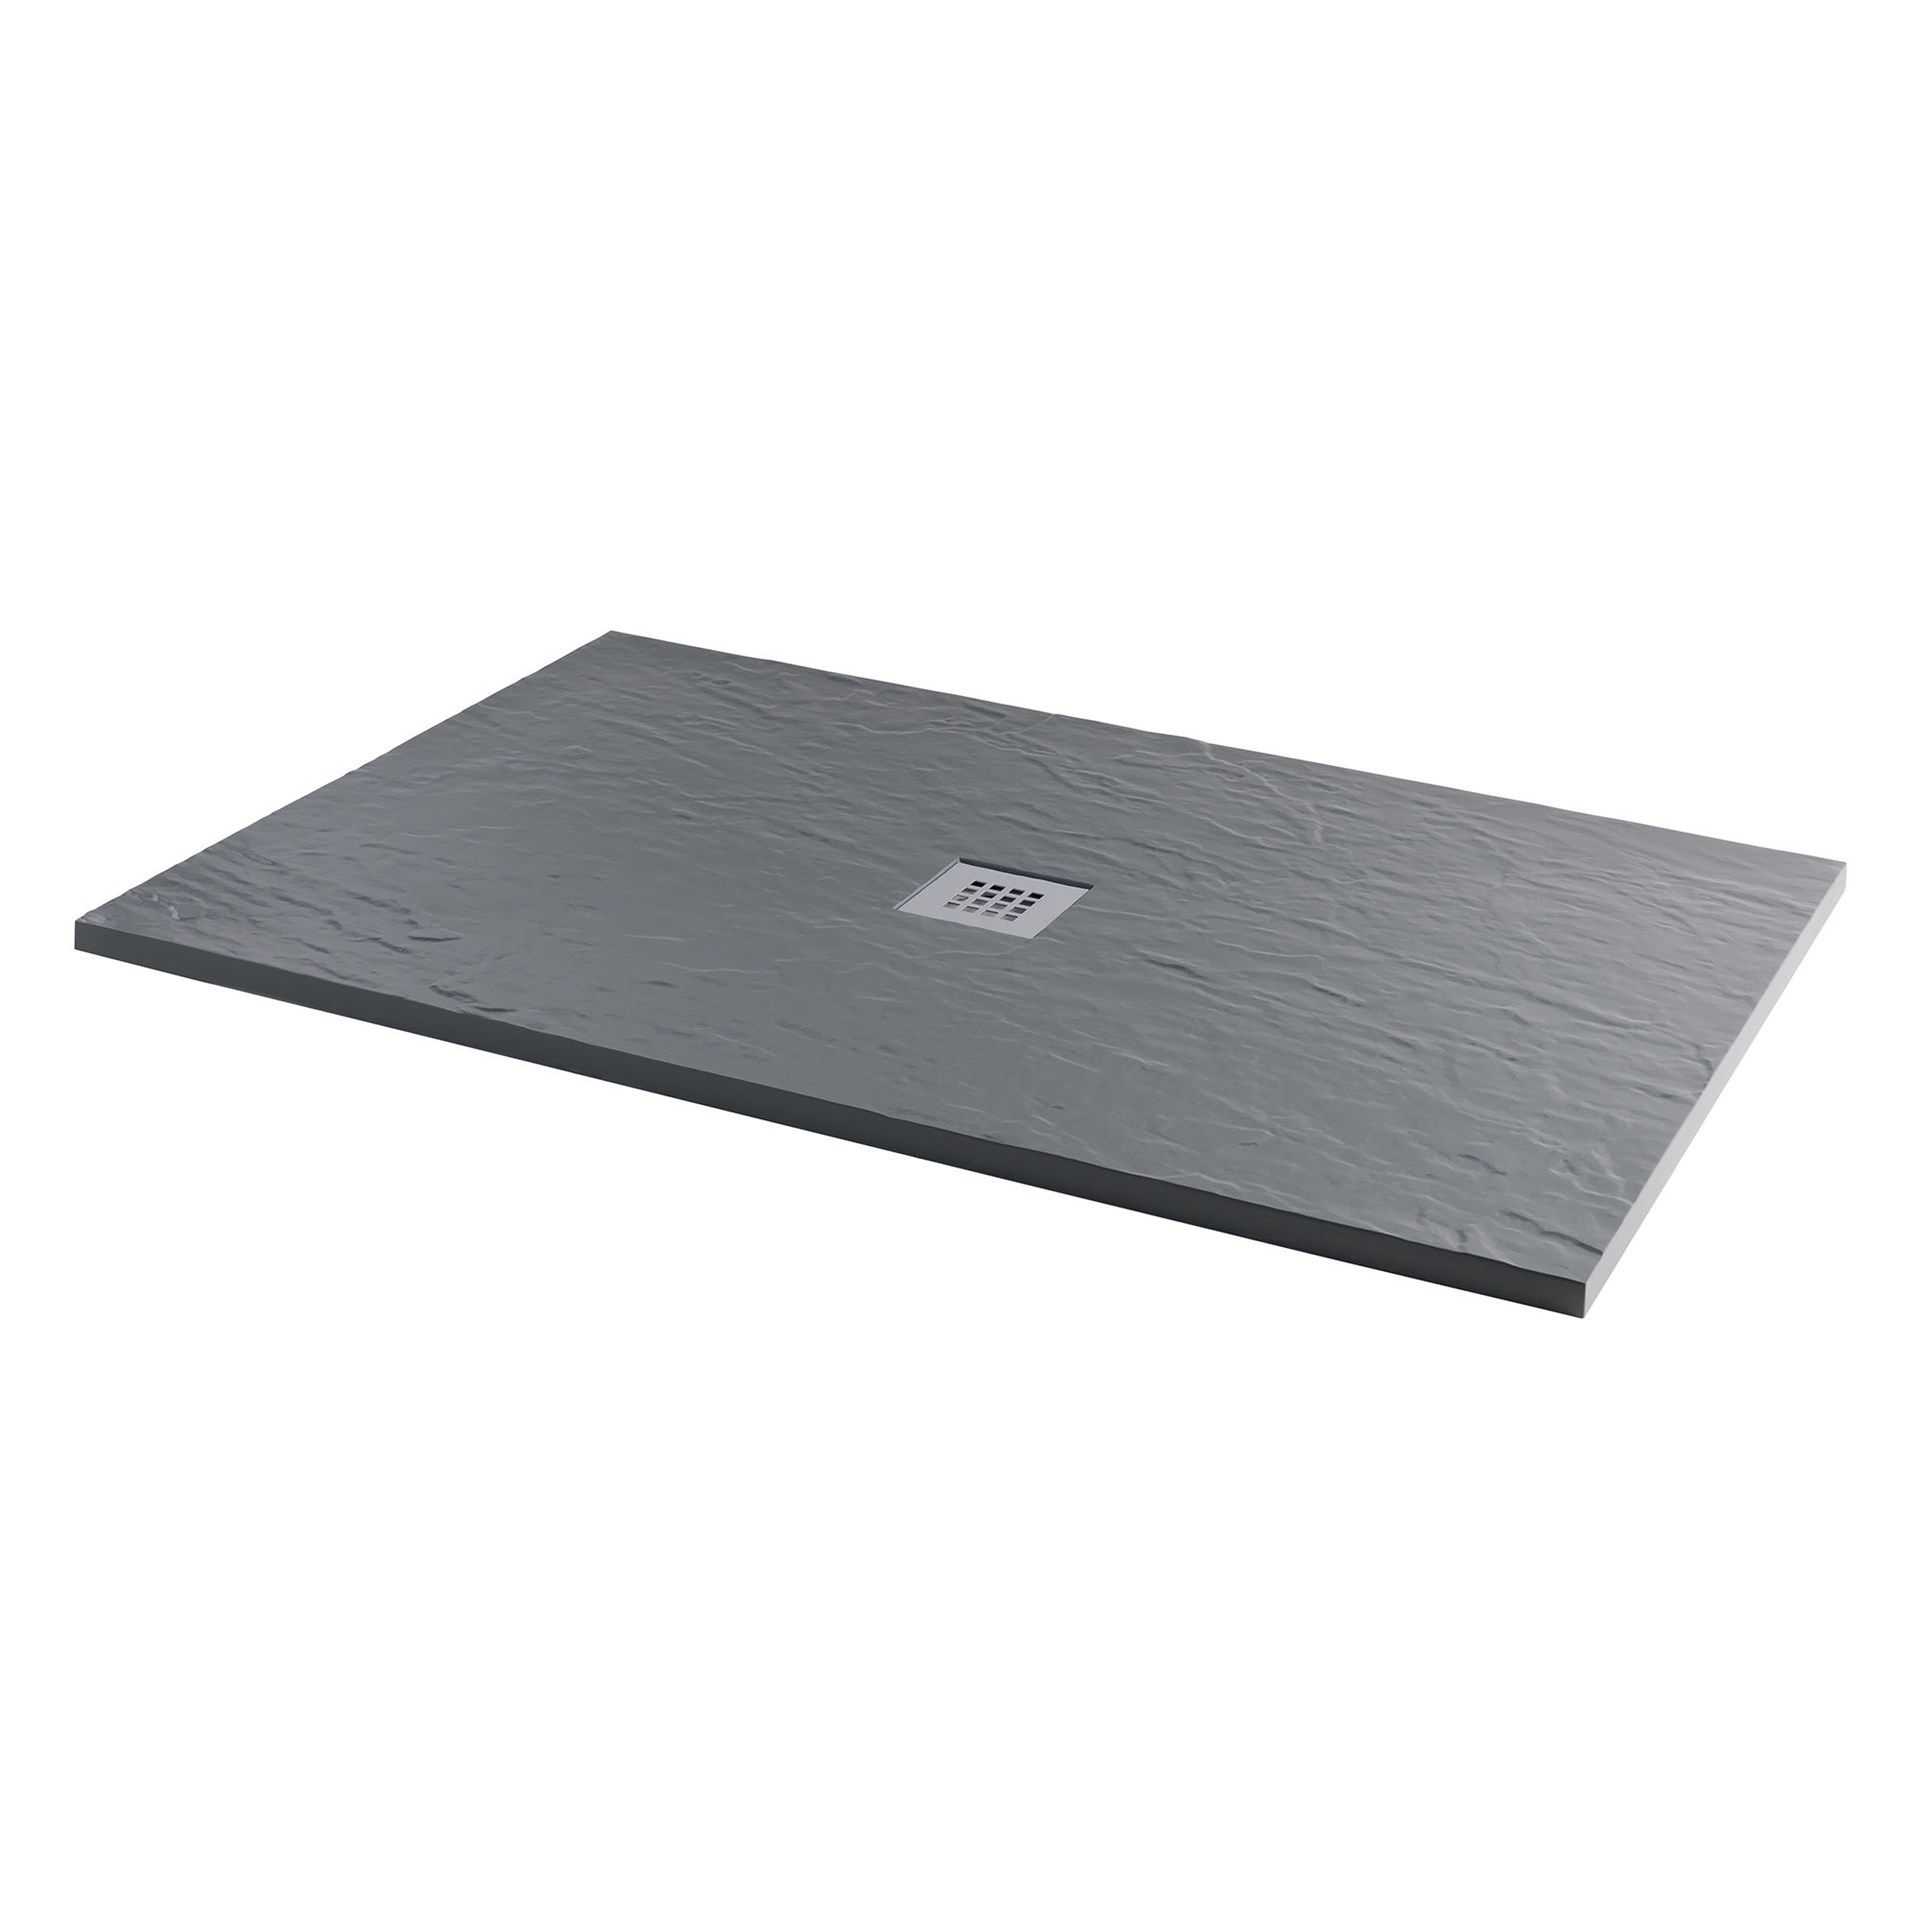 New (S9) 1400x900 mm Rectangular Slate Effect Shower Tray In Grey. Manufactured In The Uk From H... - Image 3 of 3